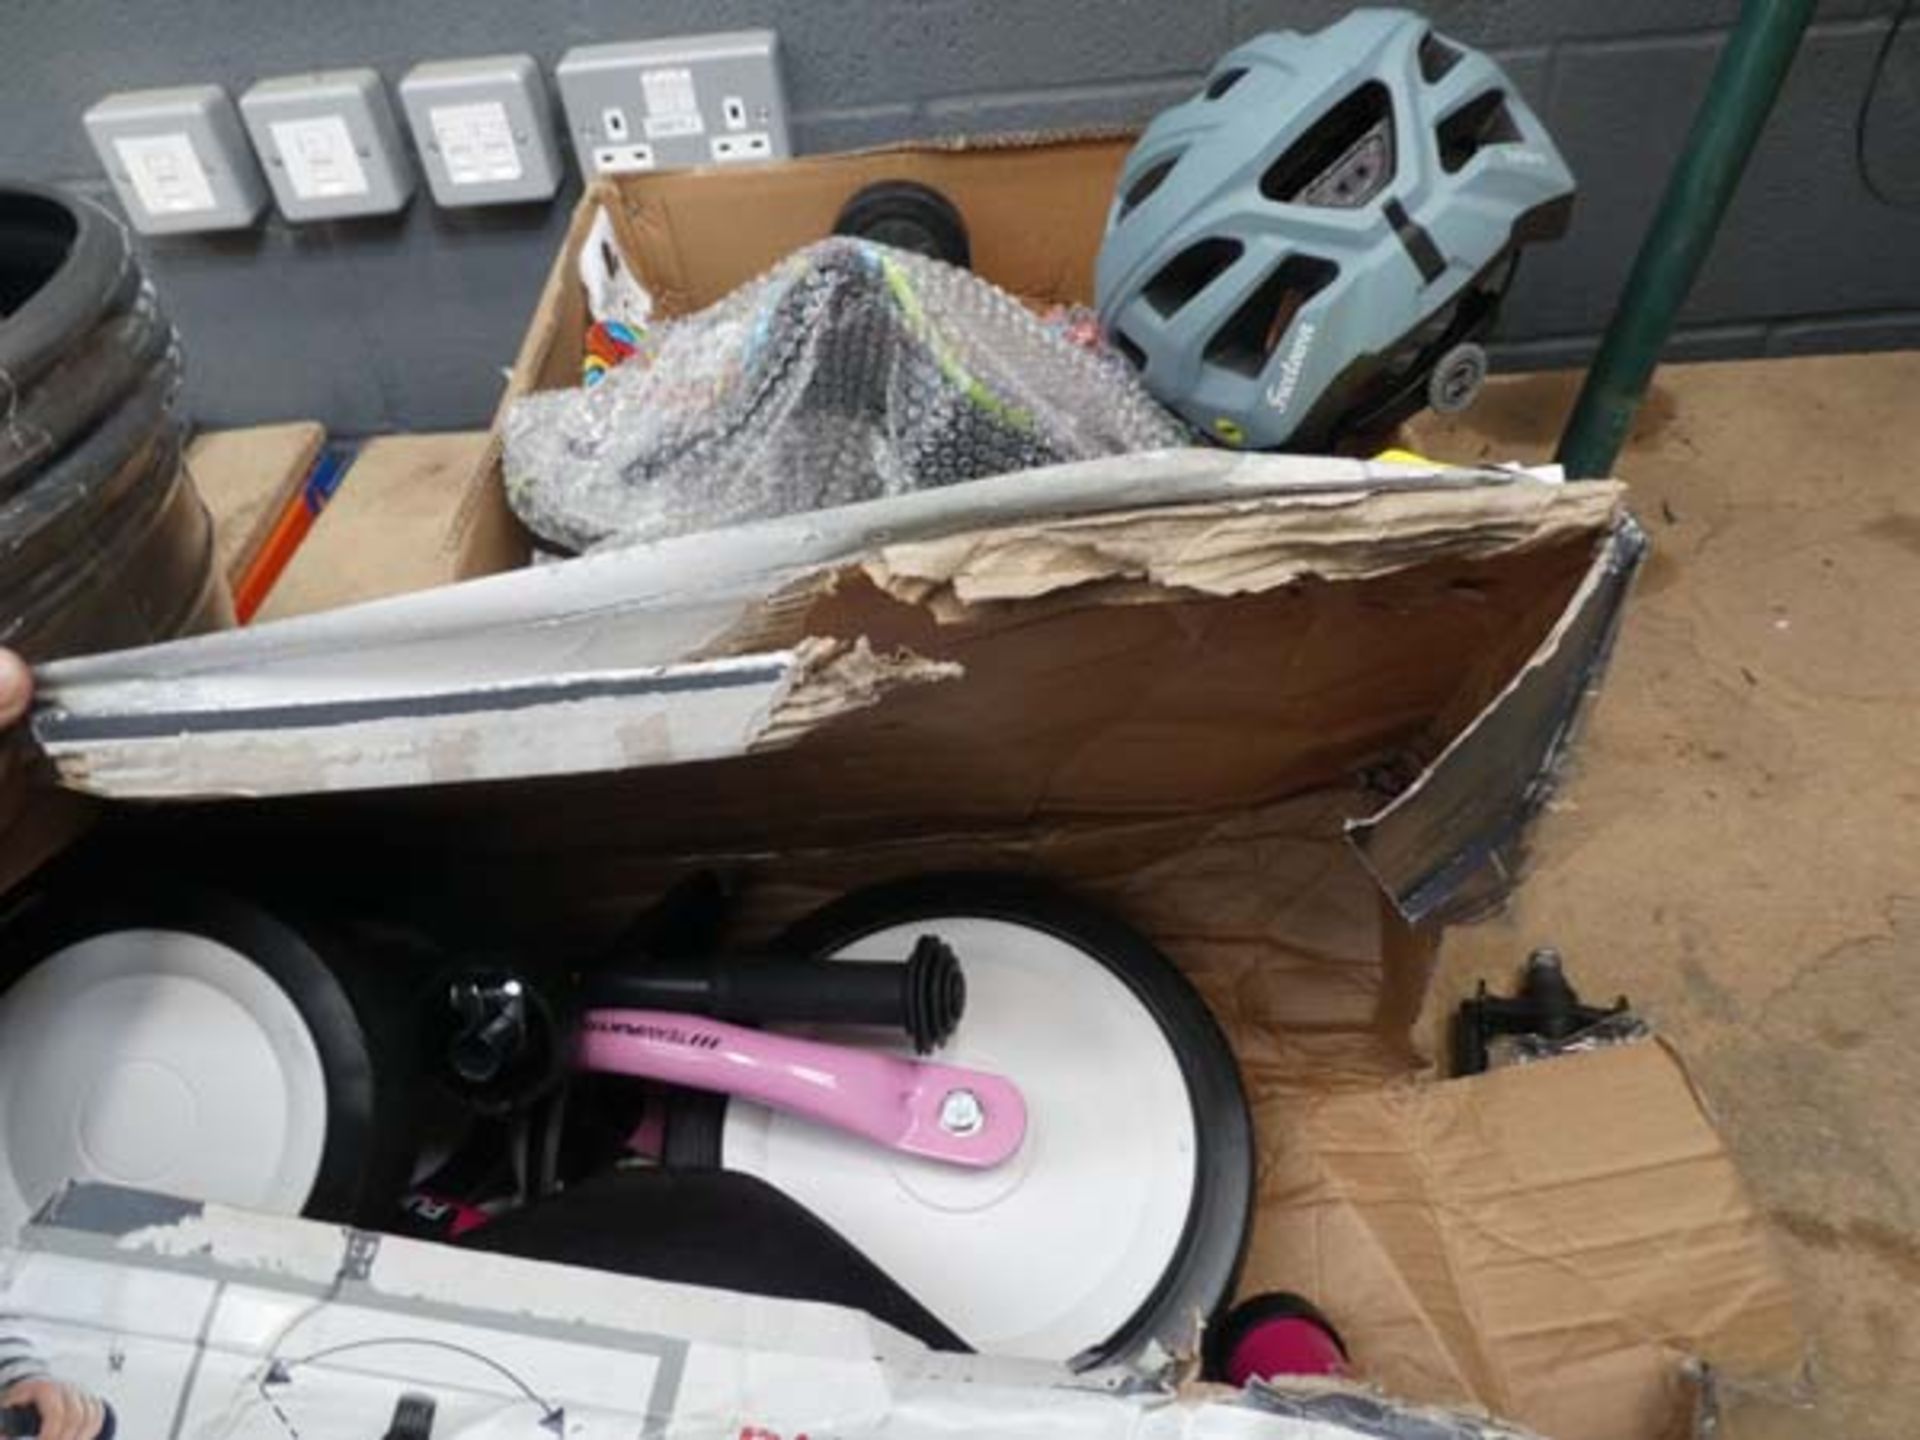 Box containing flatpack trike, helmet, and balance board frame